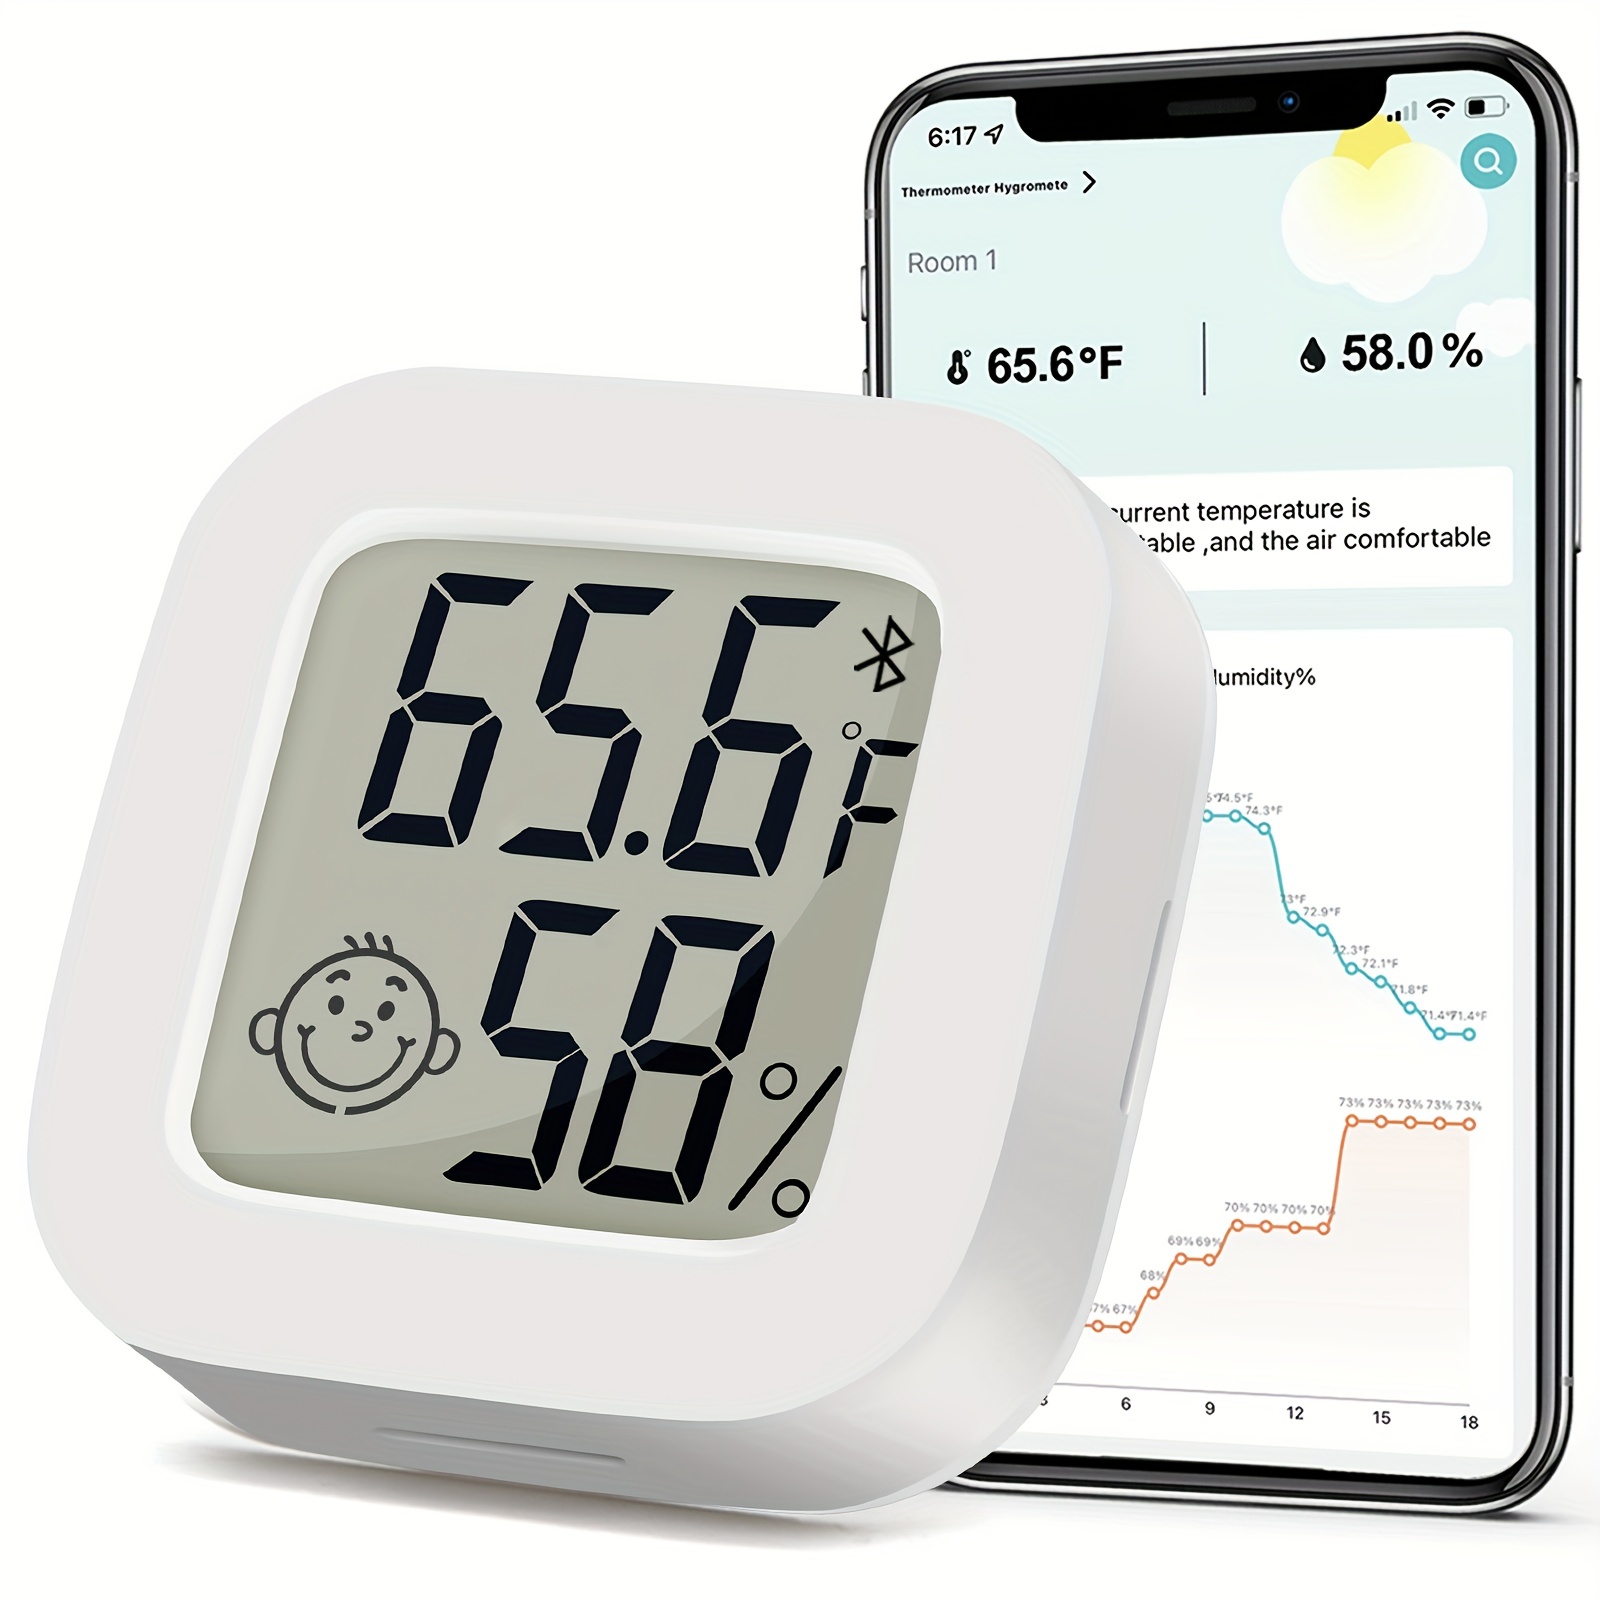 ThermoPro TP359 Smart Bluetooth Hygrometer Thermometer, 260ft Wireless Remote Temp and Humidity Monitor with Large Backlit LCD, Indoor Room